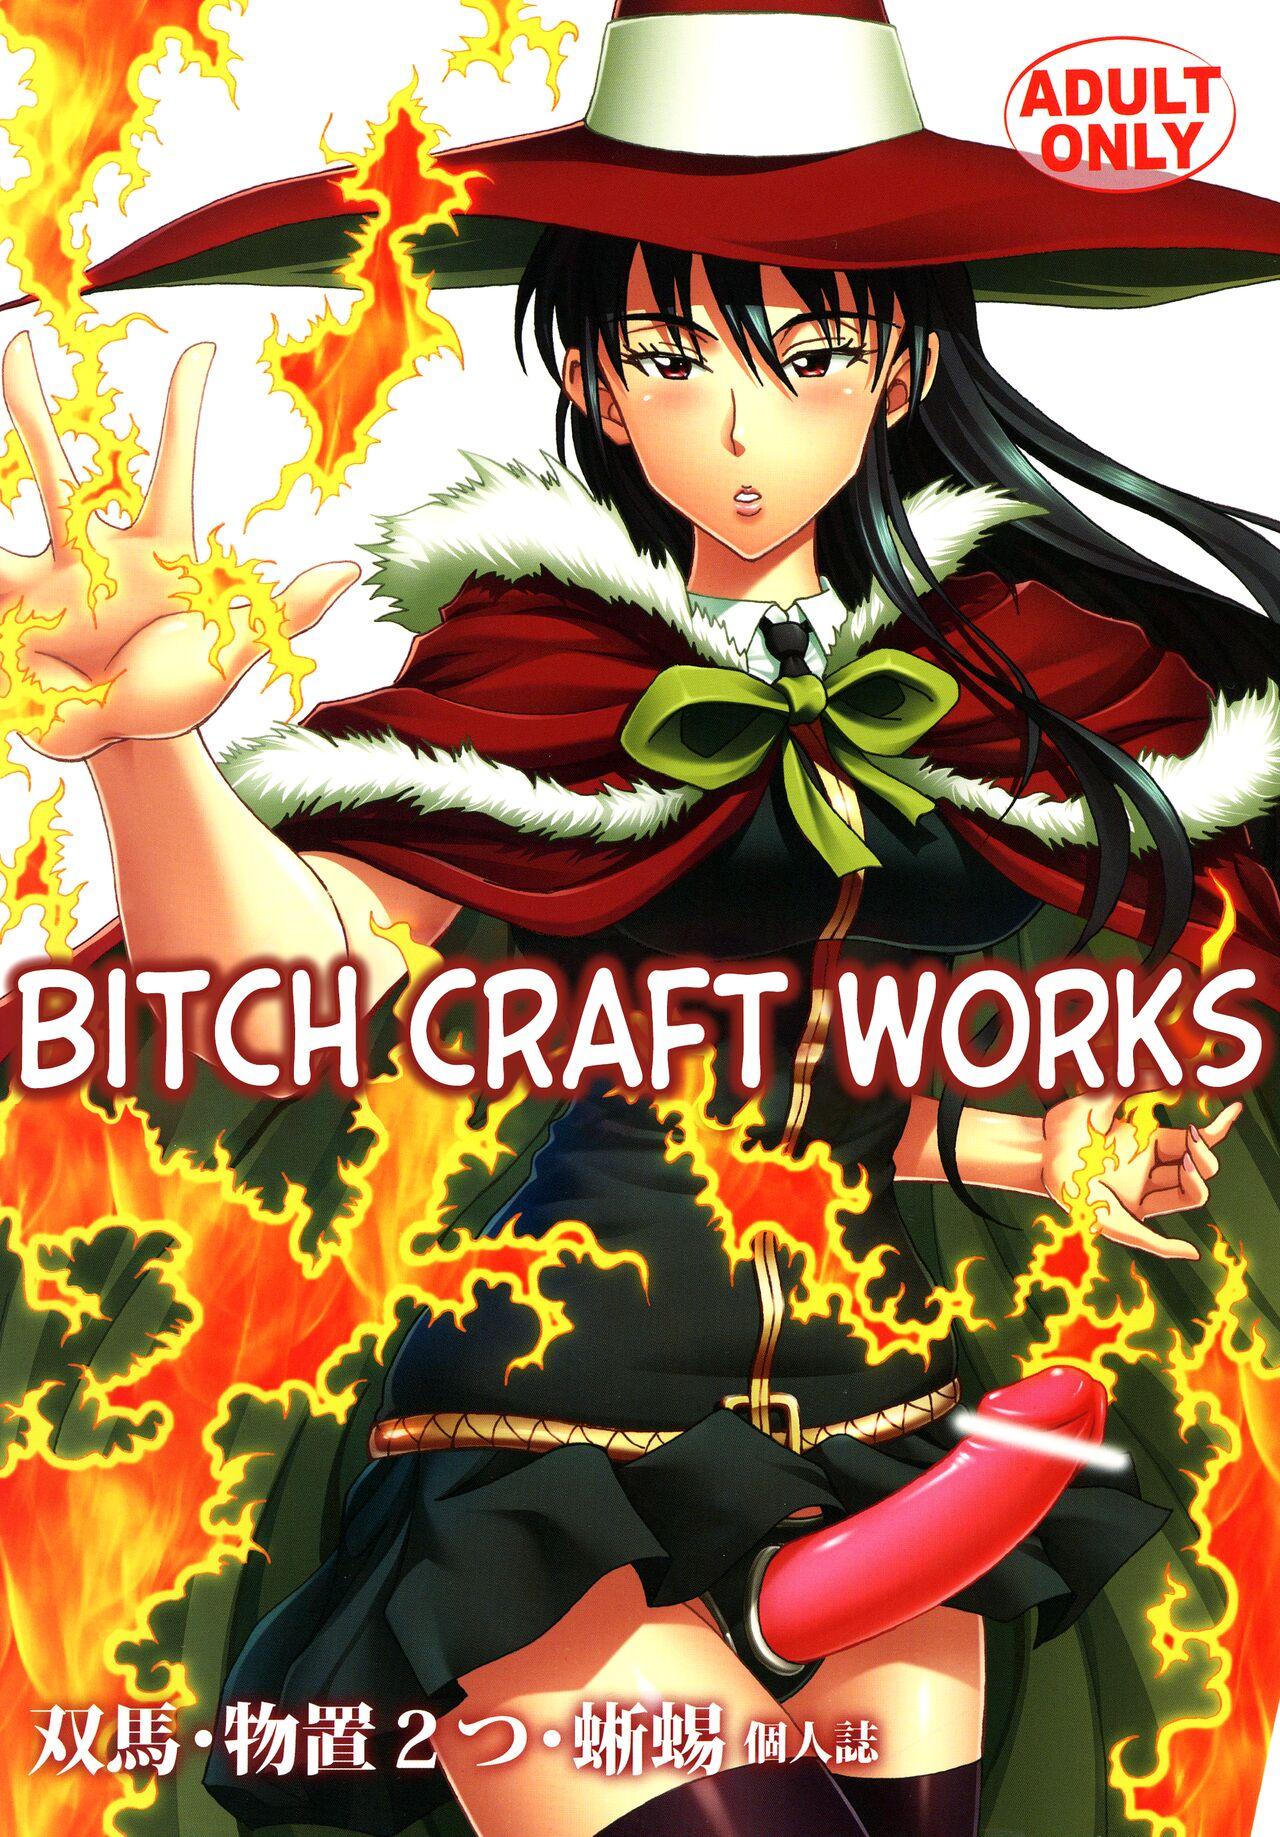 New Bitch Craft Works - Witch craft works Blacksonboys - Picture 1